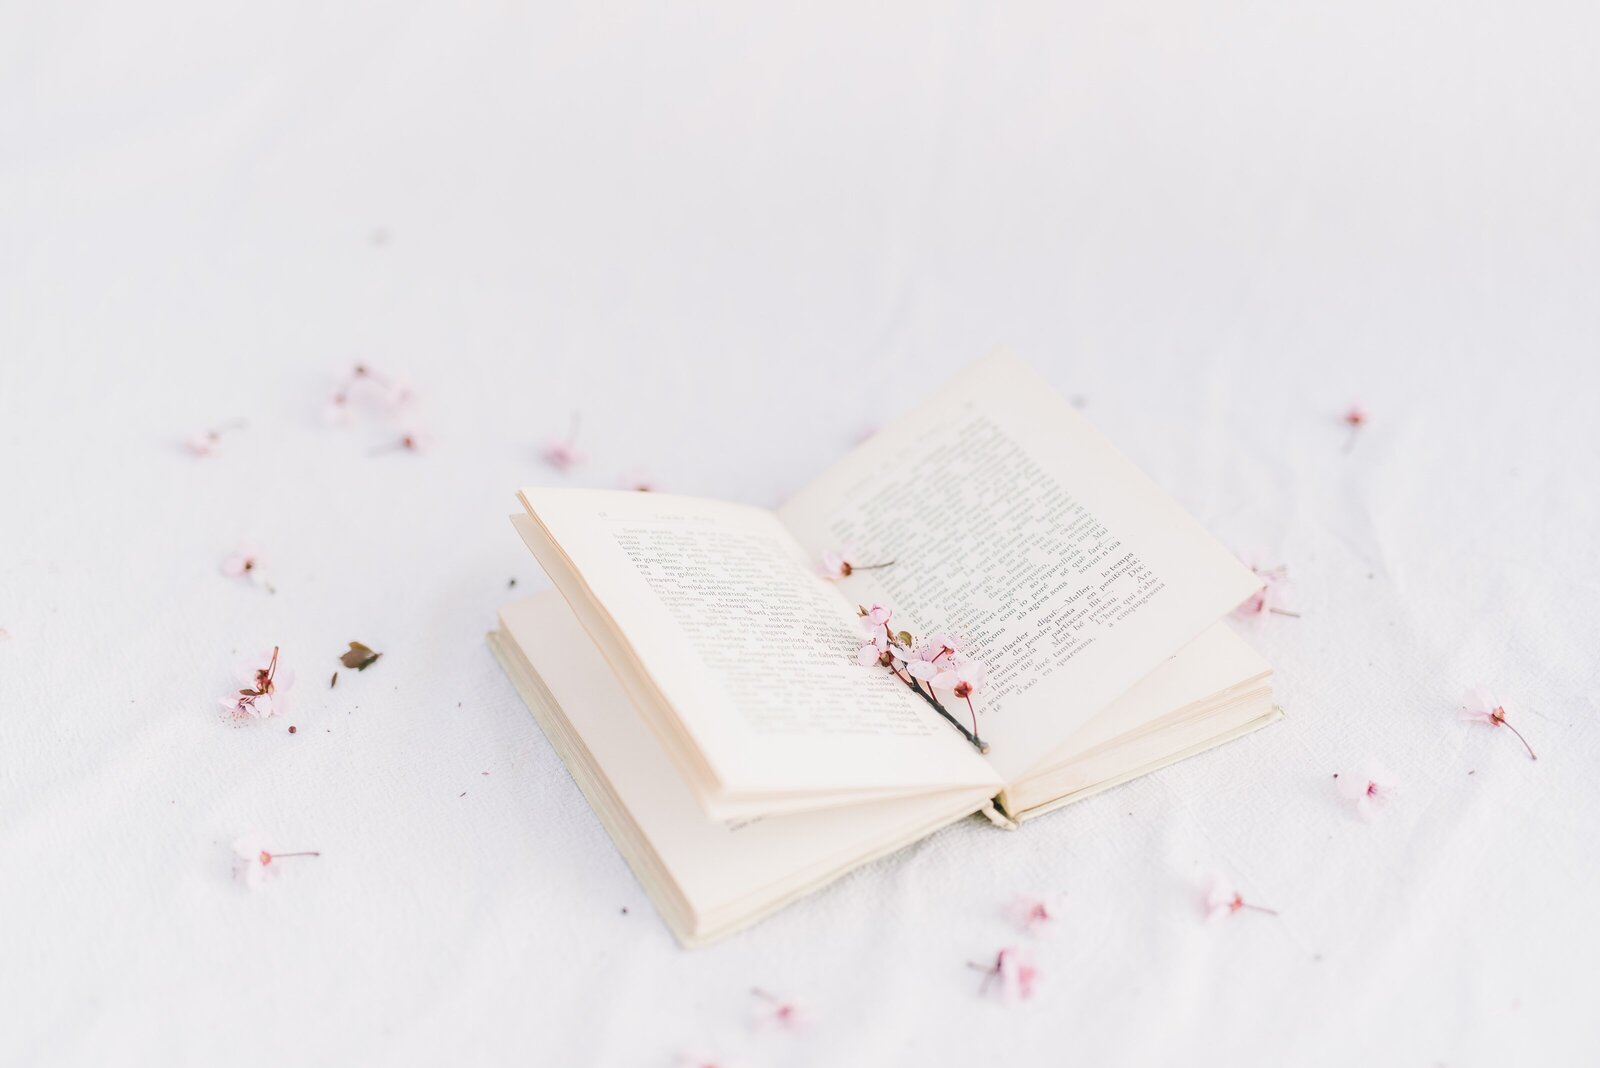 An open book with cherry blossoms on it